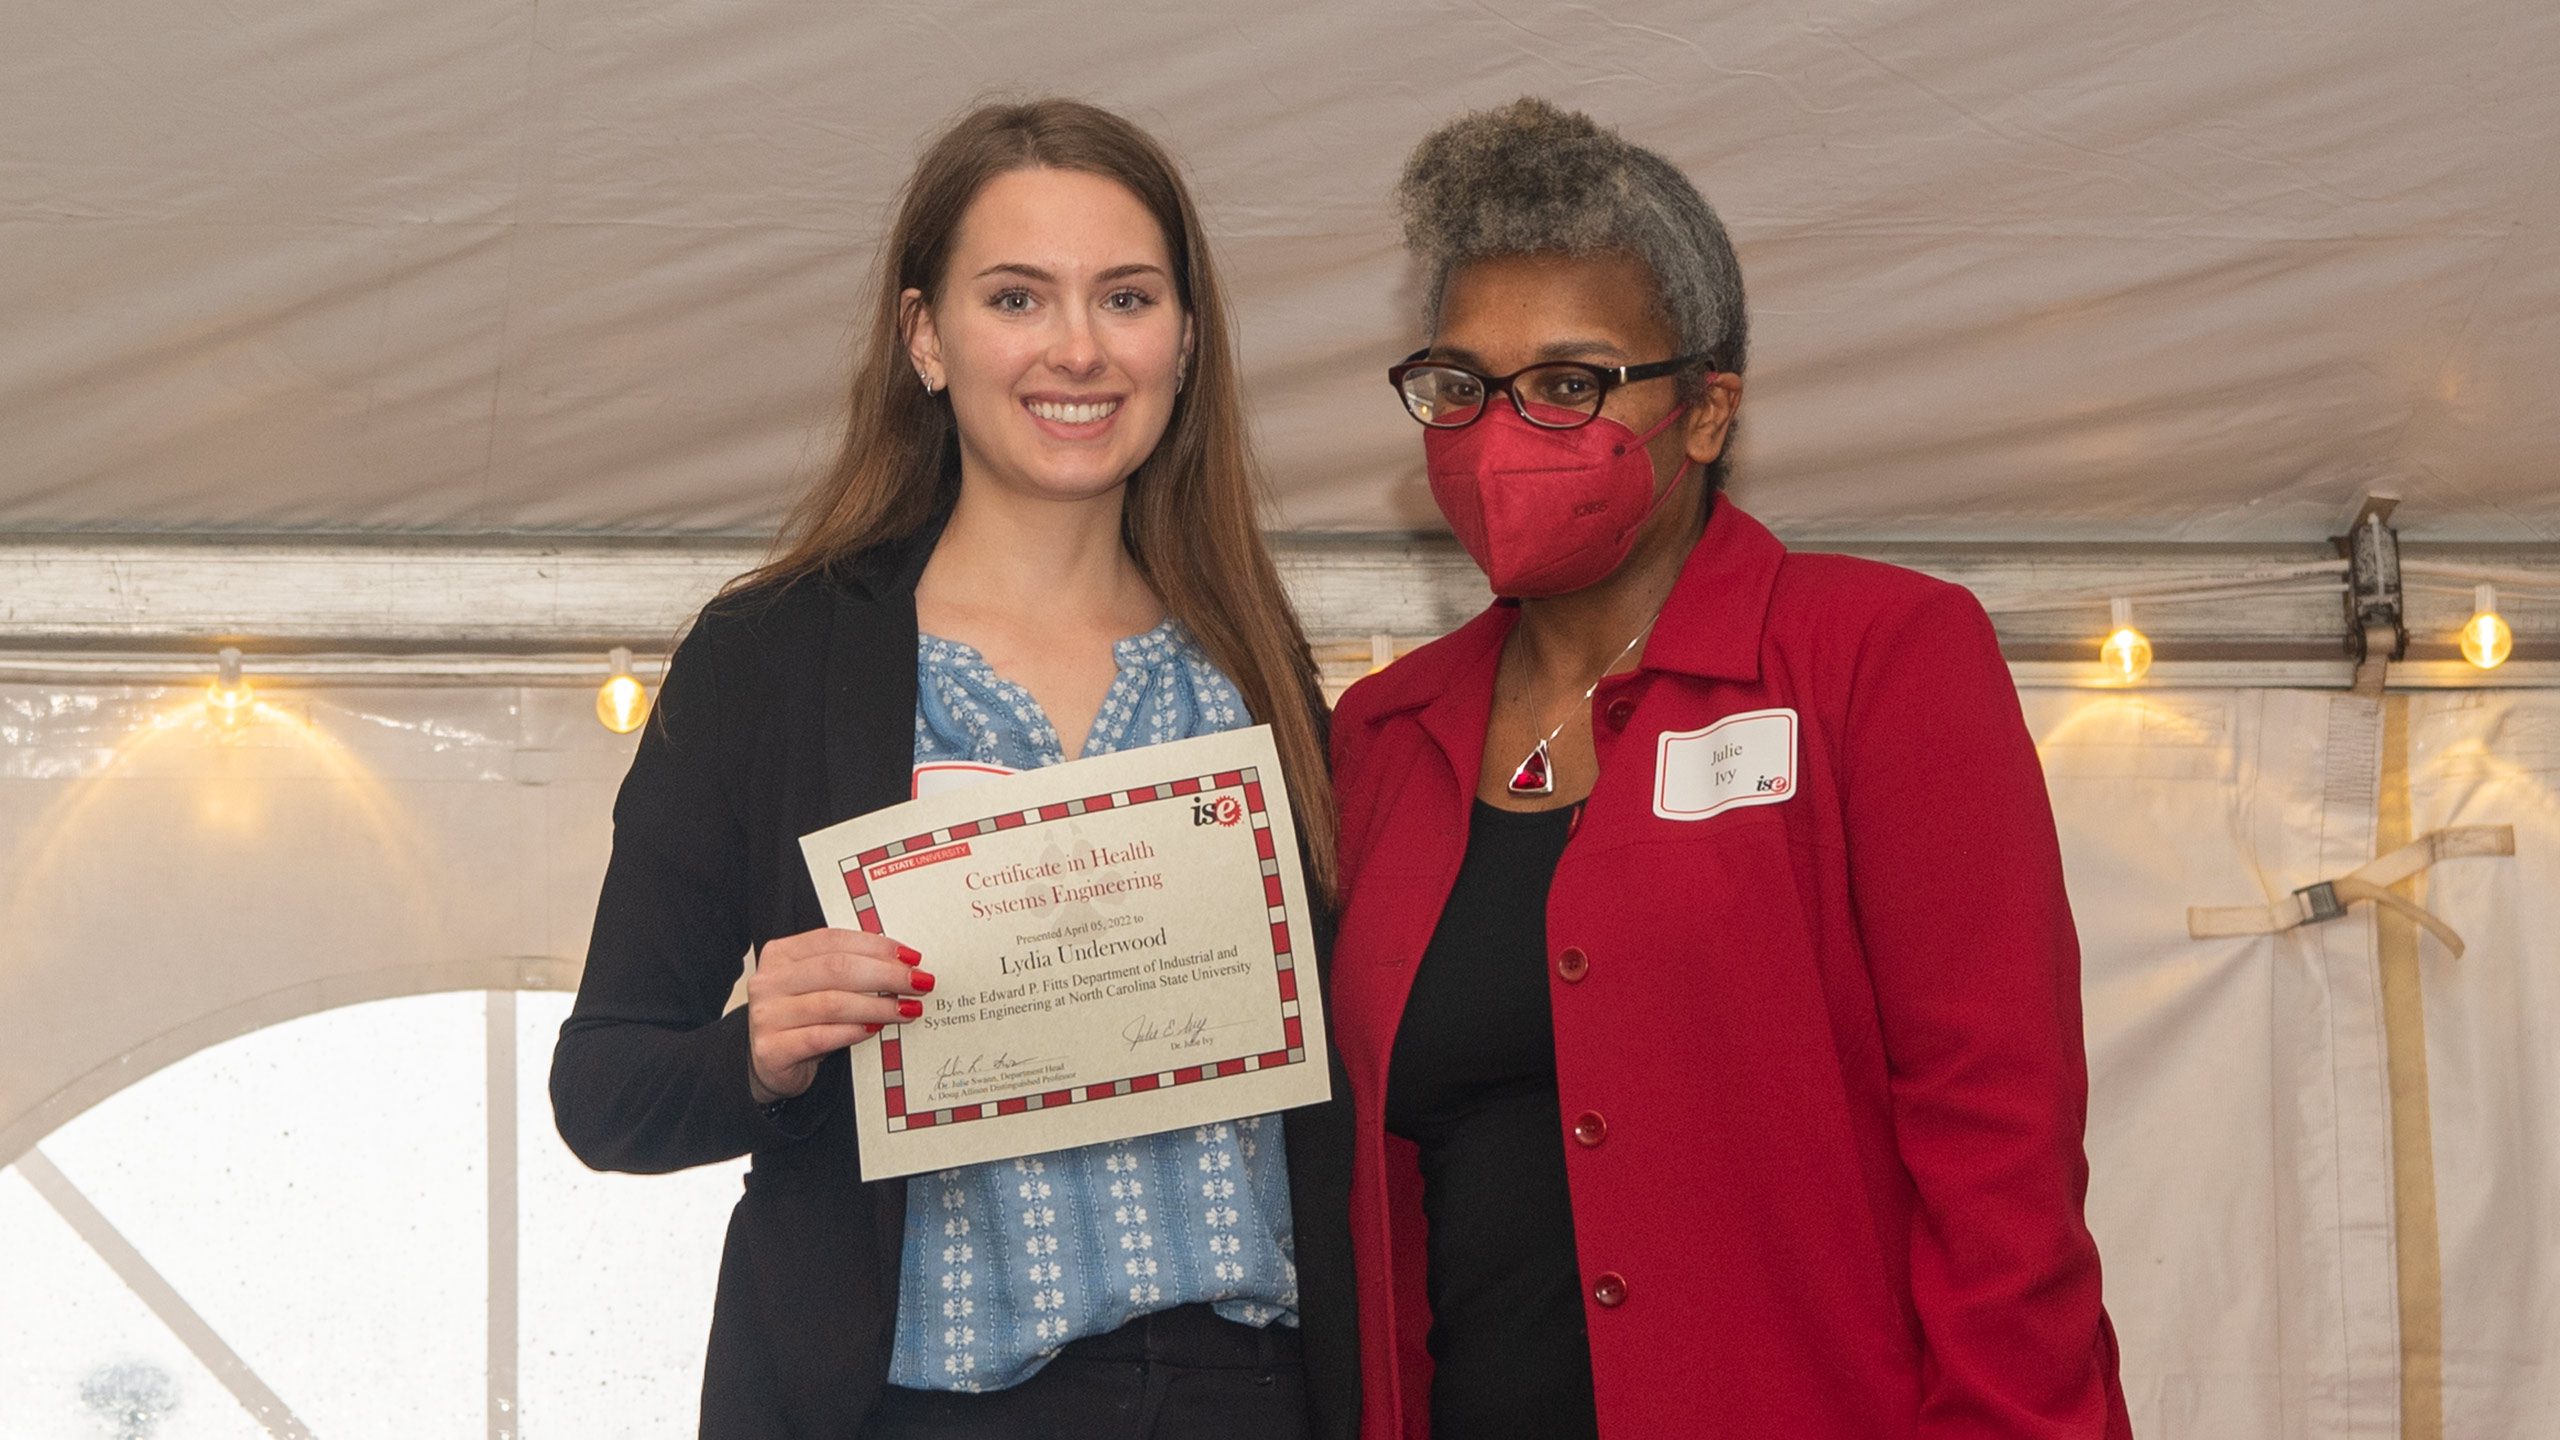 Lydia Underwood receiving her Healthcare Systems Engineering Certificate at the 2022 C.A. Anderson Awards